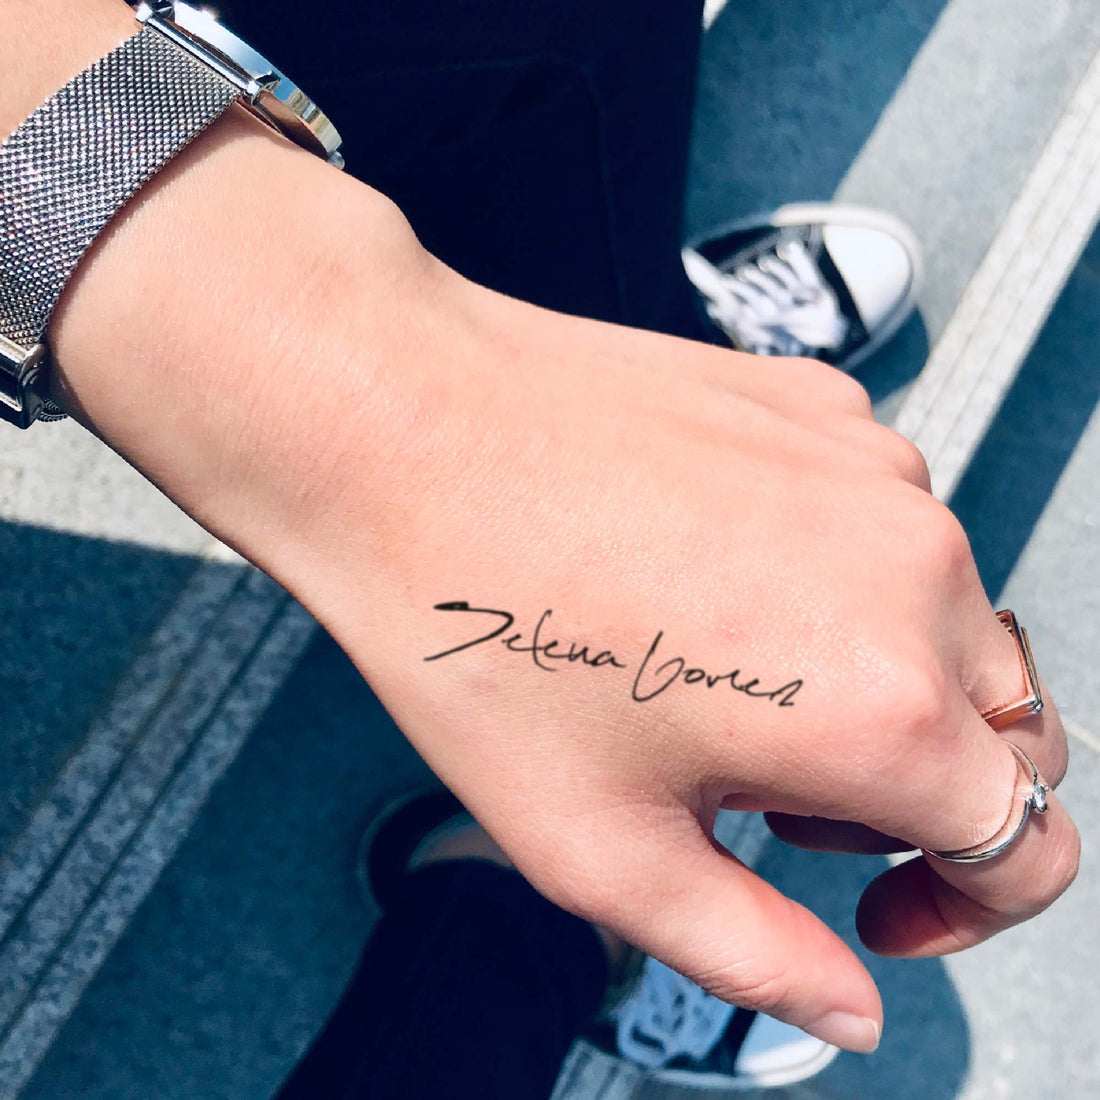 Selena Gomez custom temporary tattoo sticker design idea inspiration meanings removal arm wrist hand words font name signature calligraphy lyrics tour concert outfits merch accessory gift souvenir costumes wear dress up code